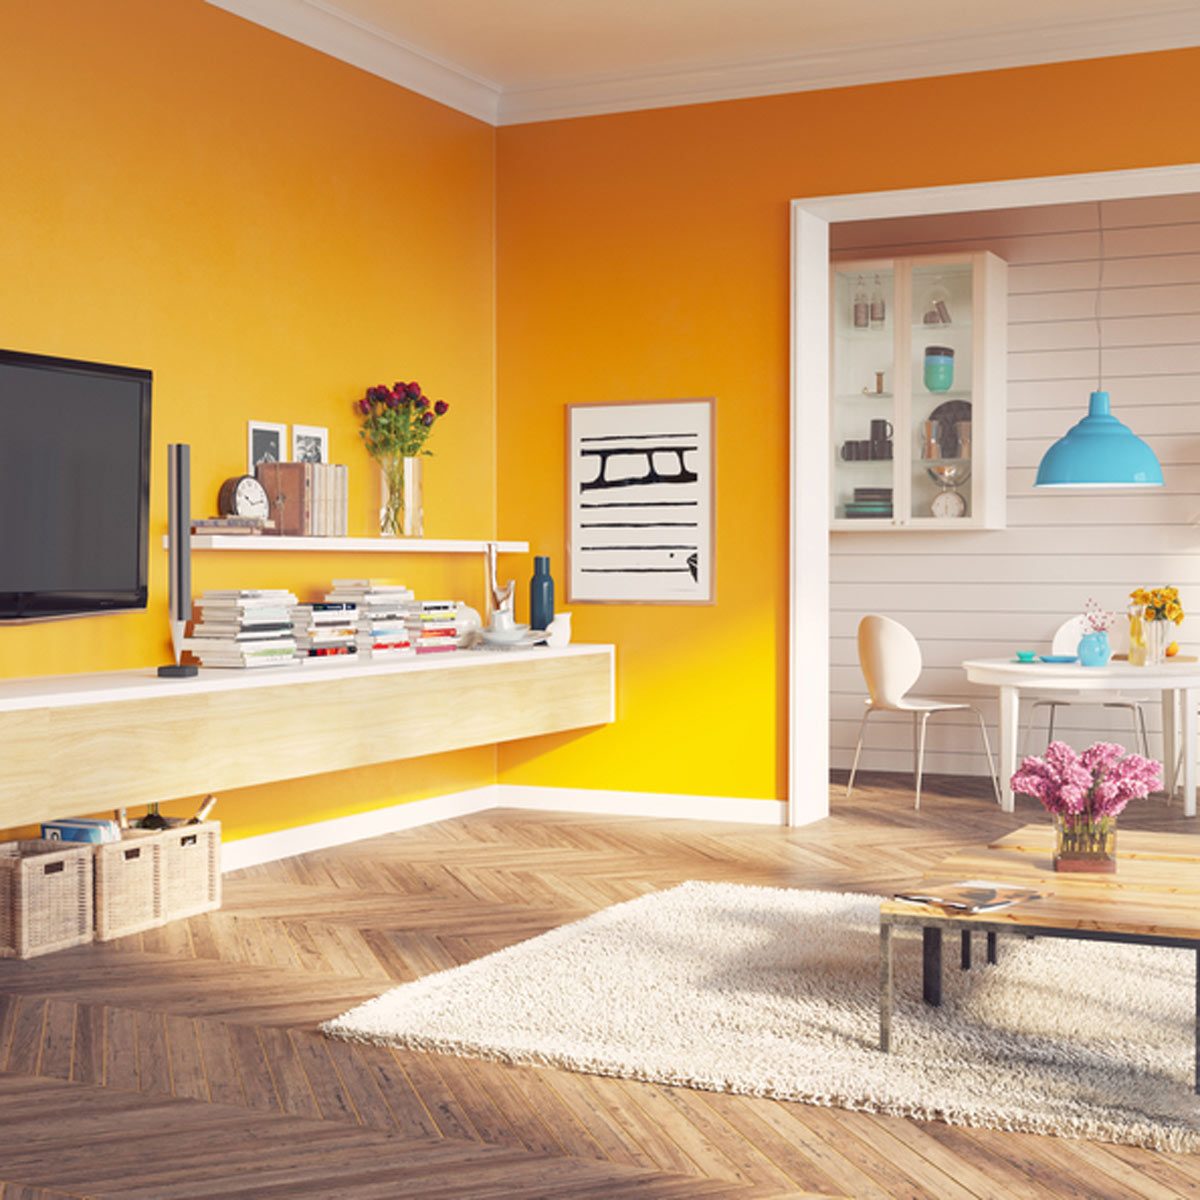 13 Great Paint Ideas For Your Living Room The Family Handyman